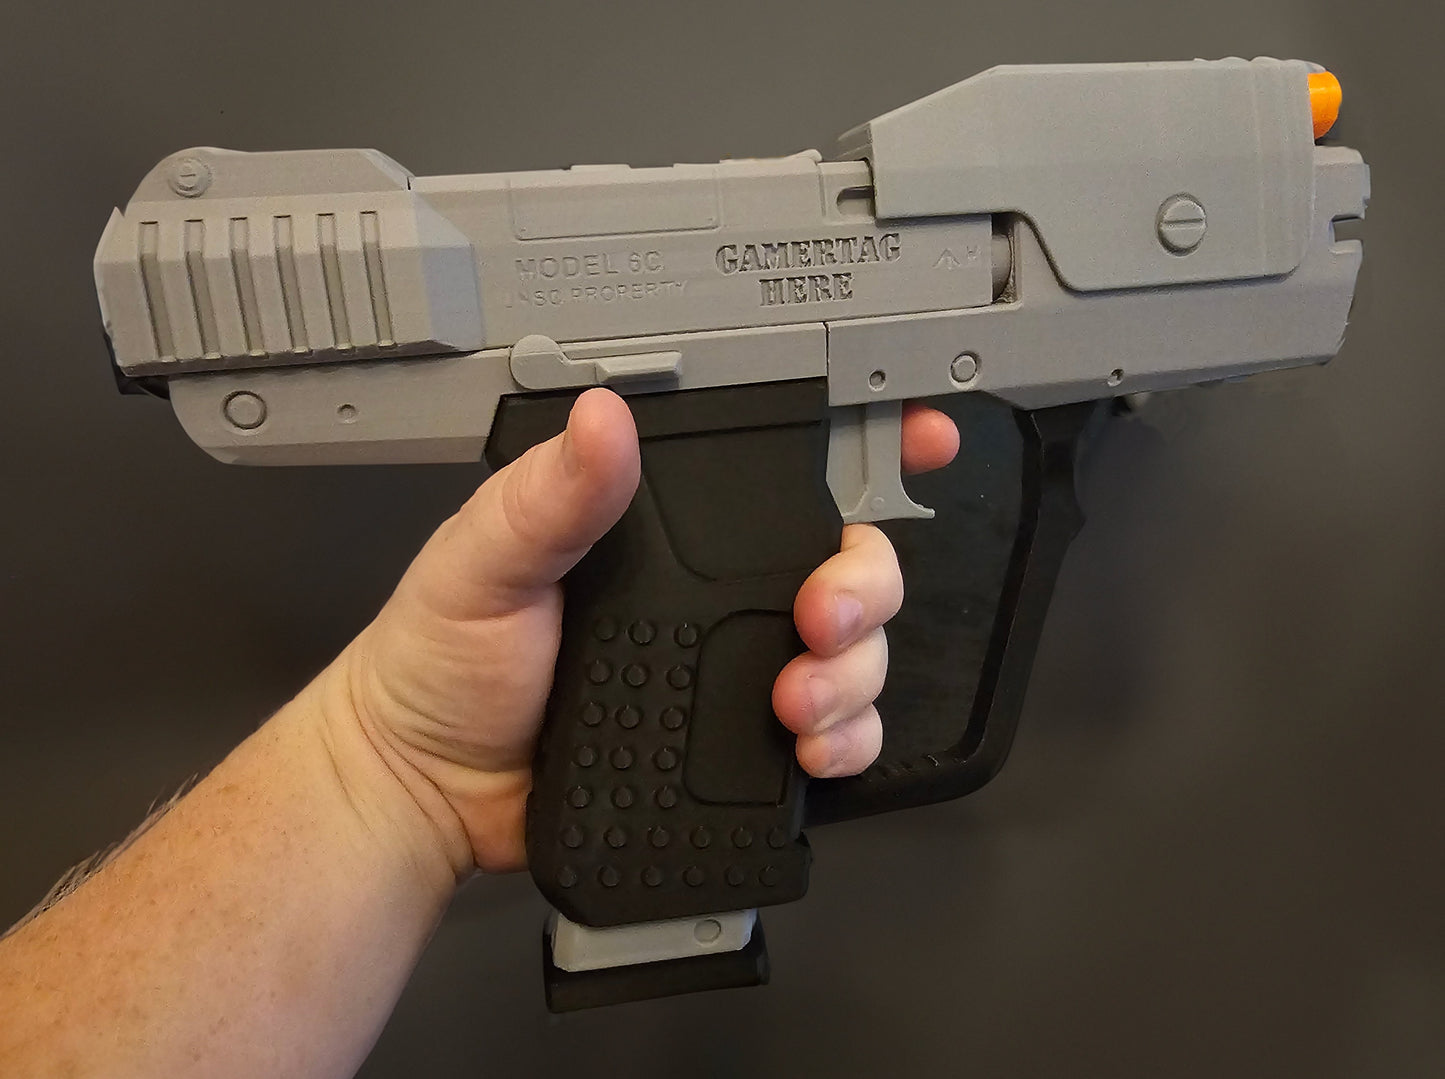 Halo Magnum M6G 1:1 Replica - 3D Printed Full-Size  - Master Chief's Weaponry for Cosplay, Collectors, and Gamers, Customizable